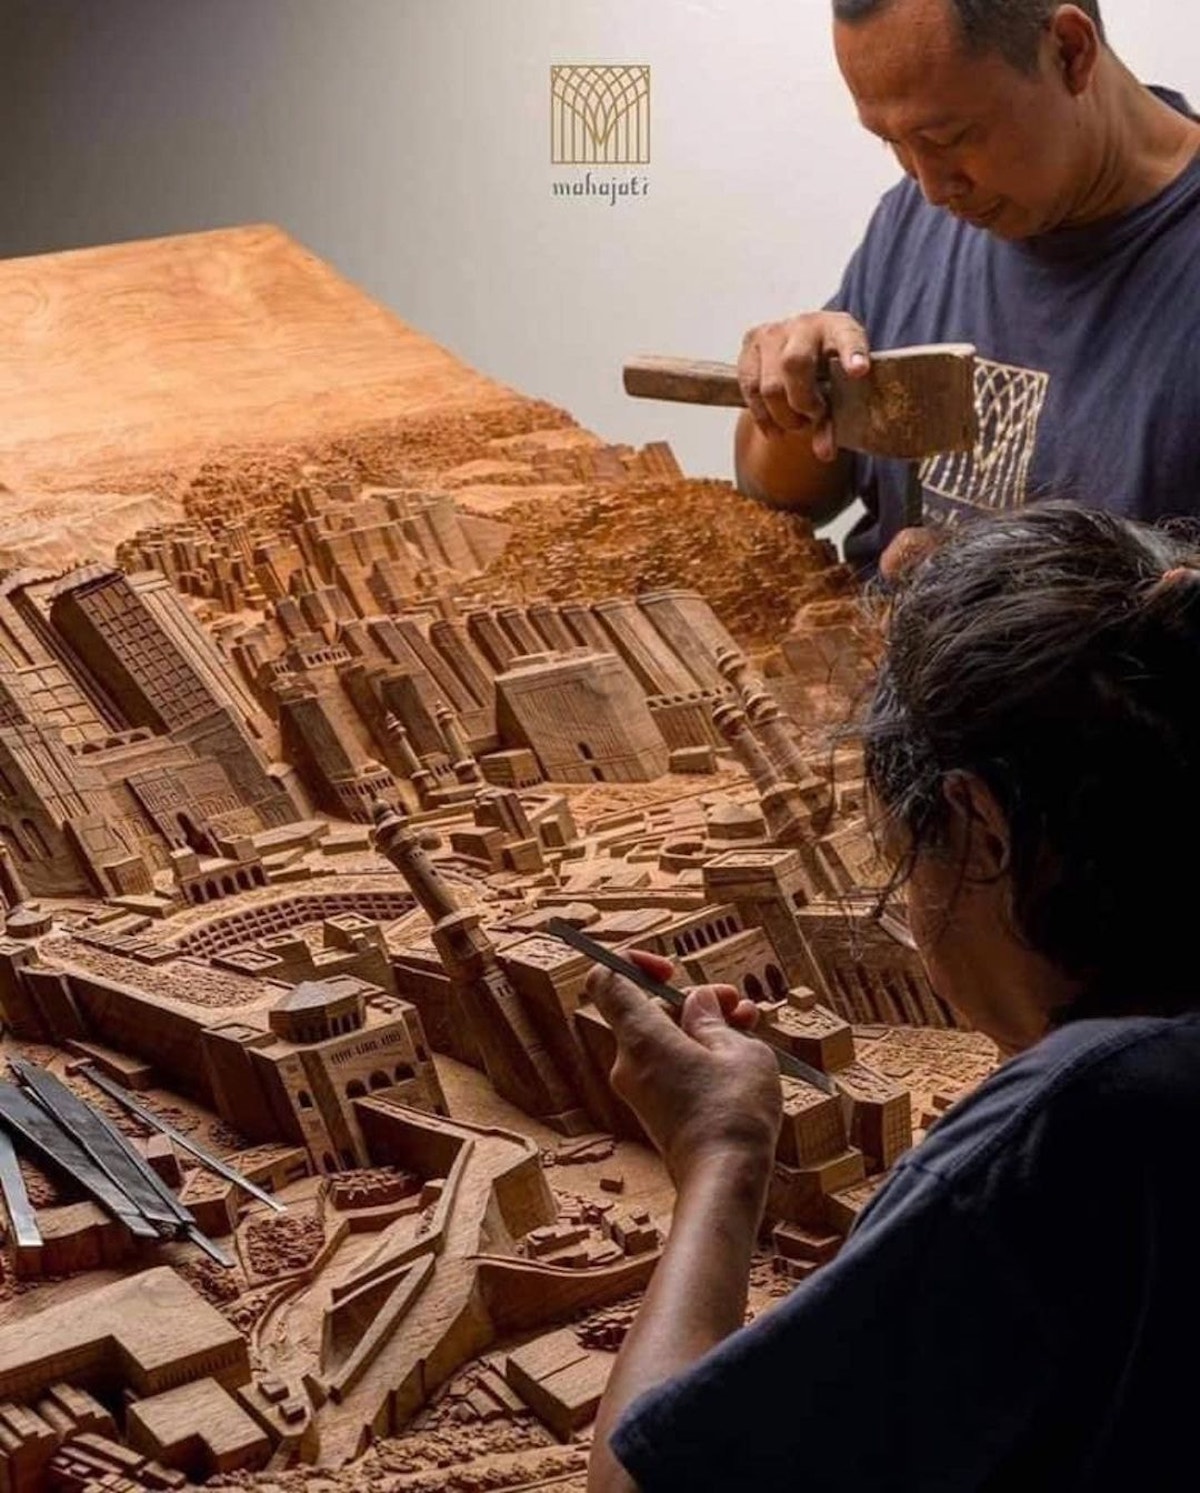 Mahajati’s Intricate Wood Carvings Support Traditional Craft